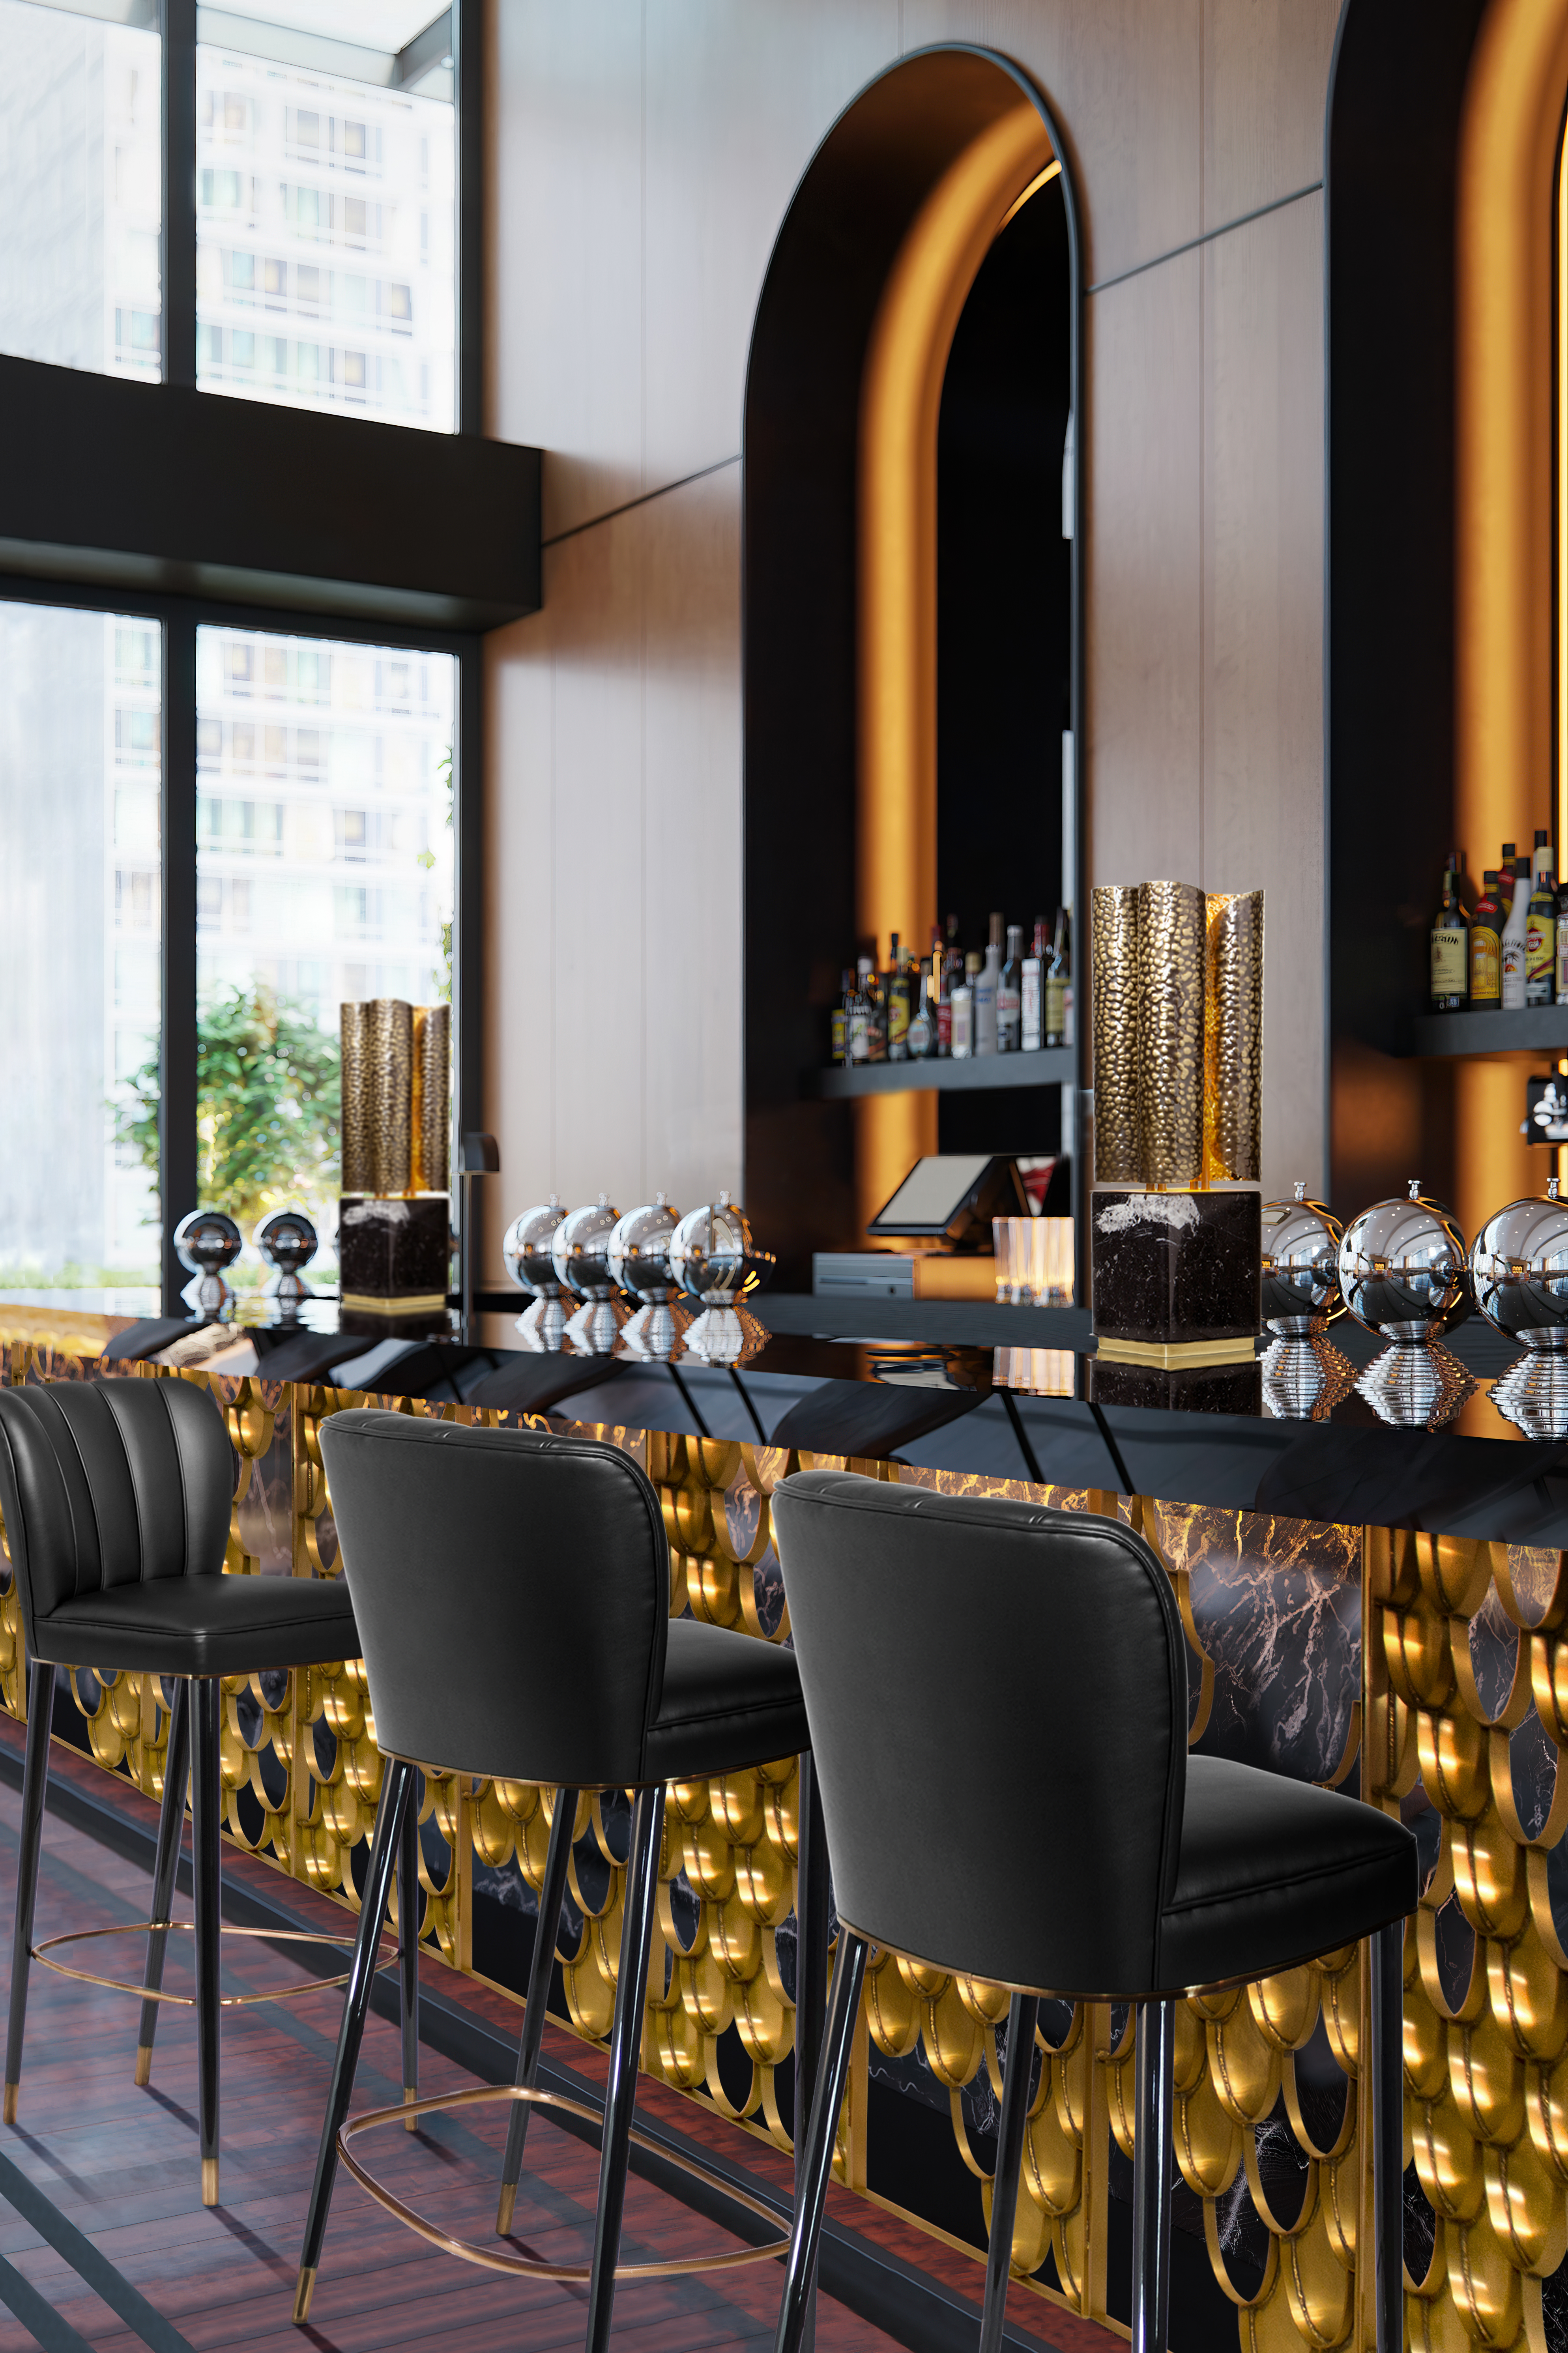 Modern Black Bar Design With Golden Accents - Home'Society